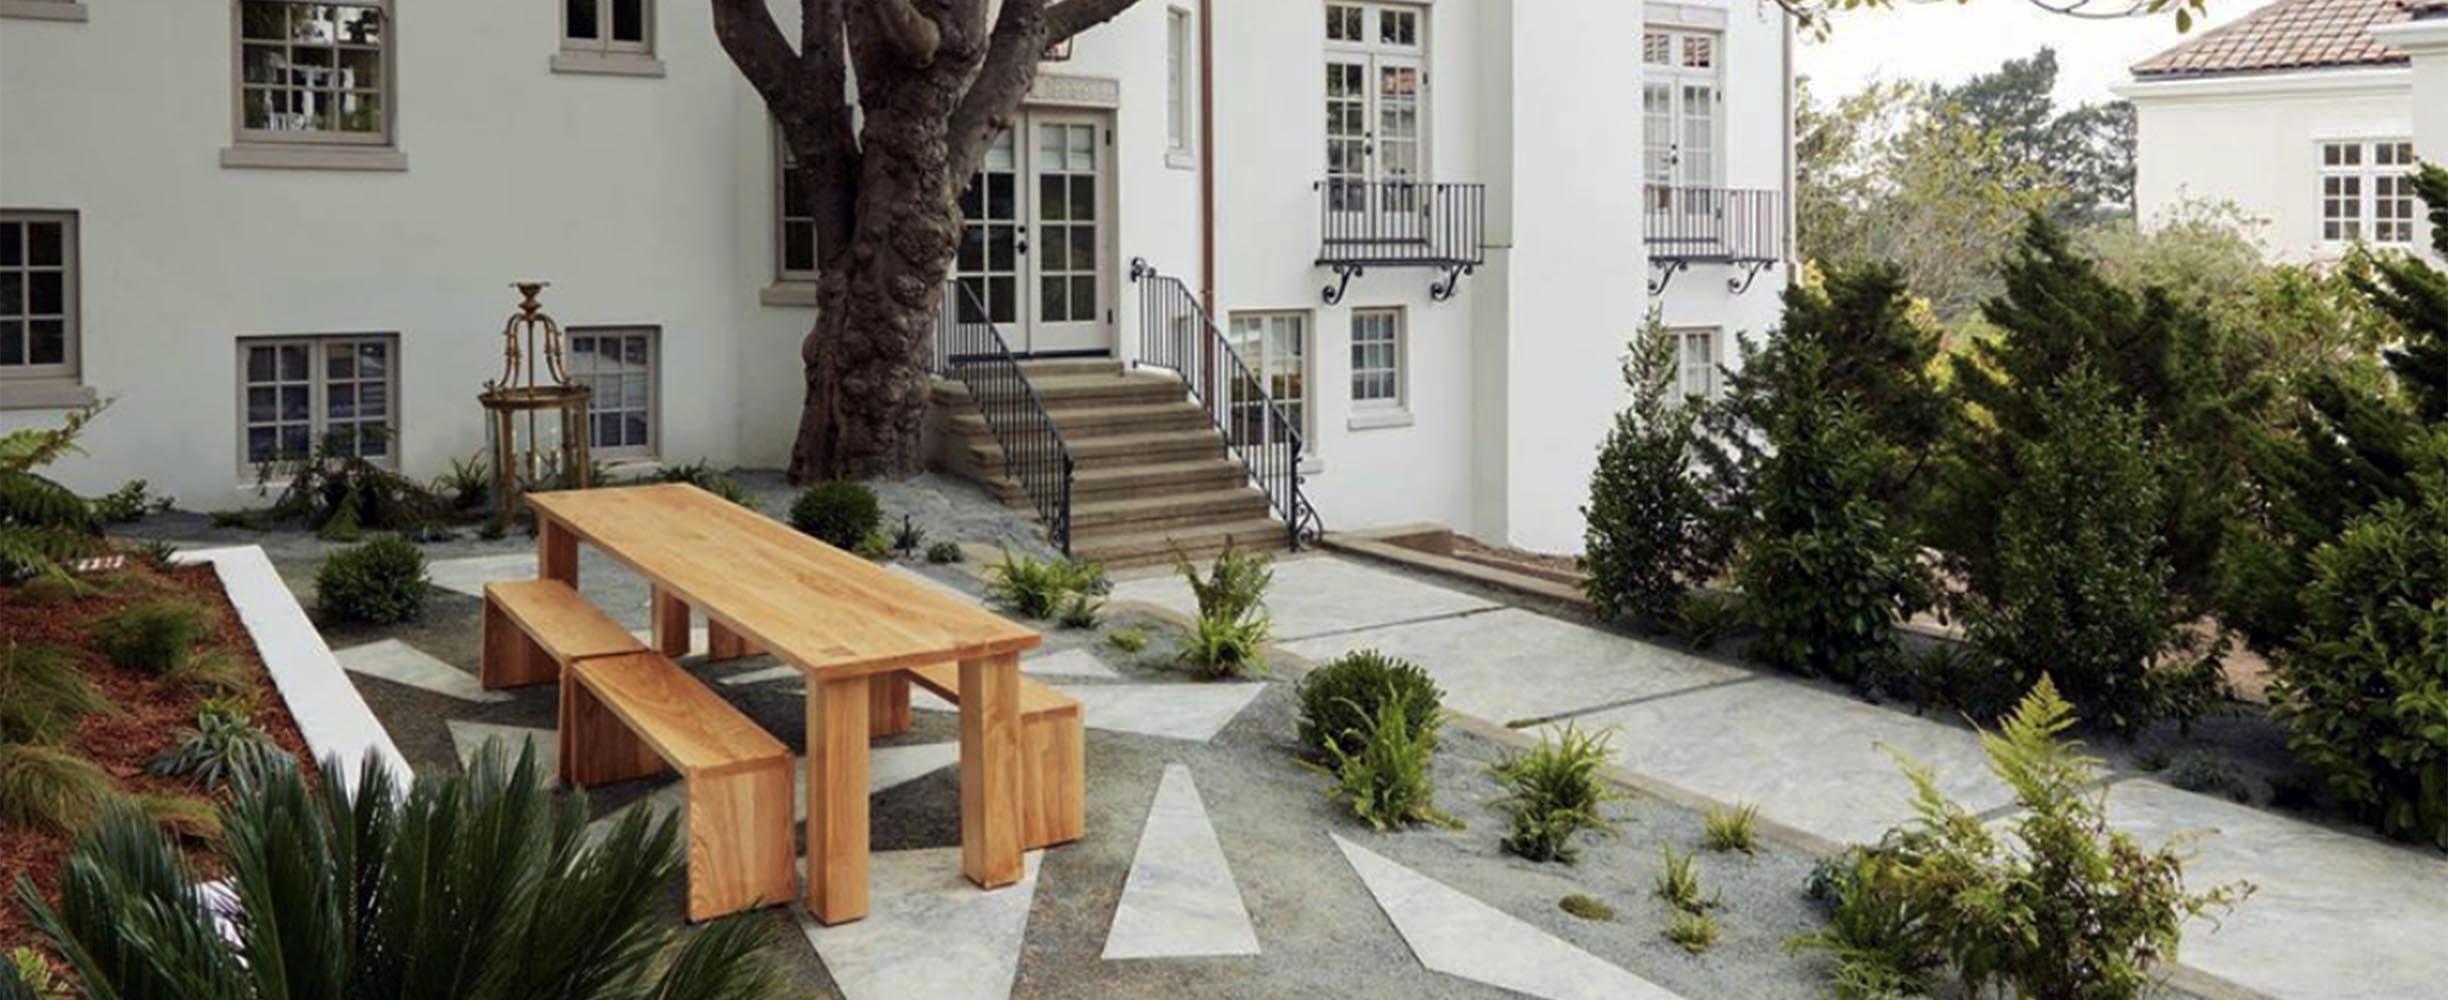 Professional patio landscaping design and implementation of modern grill, table and foreplace for classic San Francisco neighborhood building.